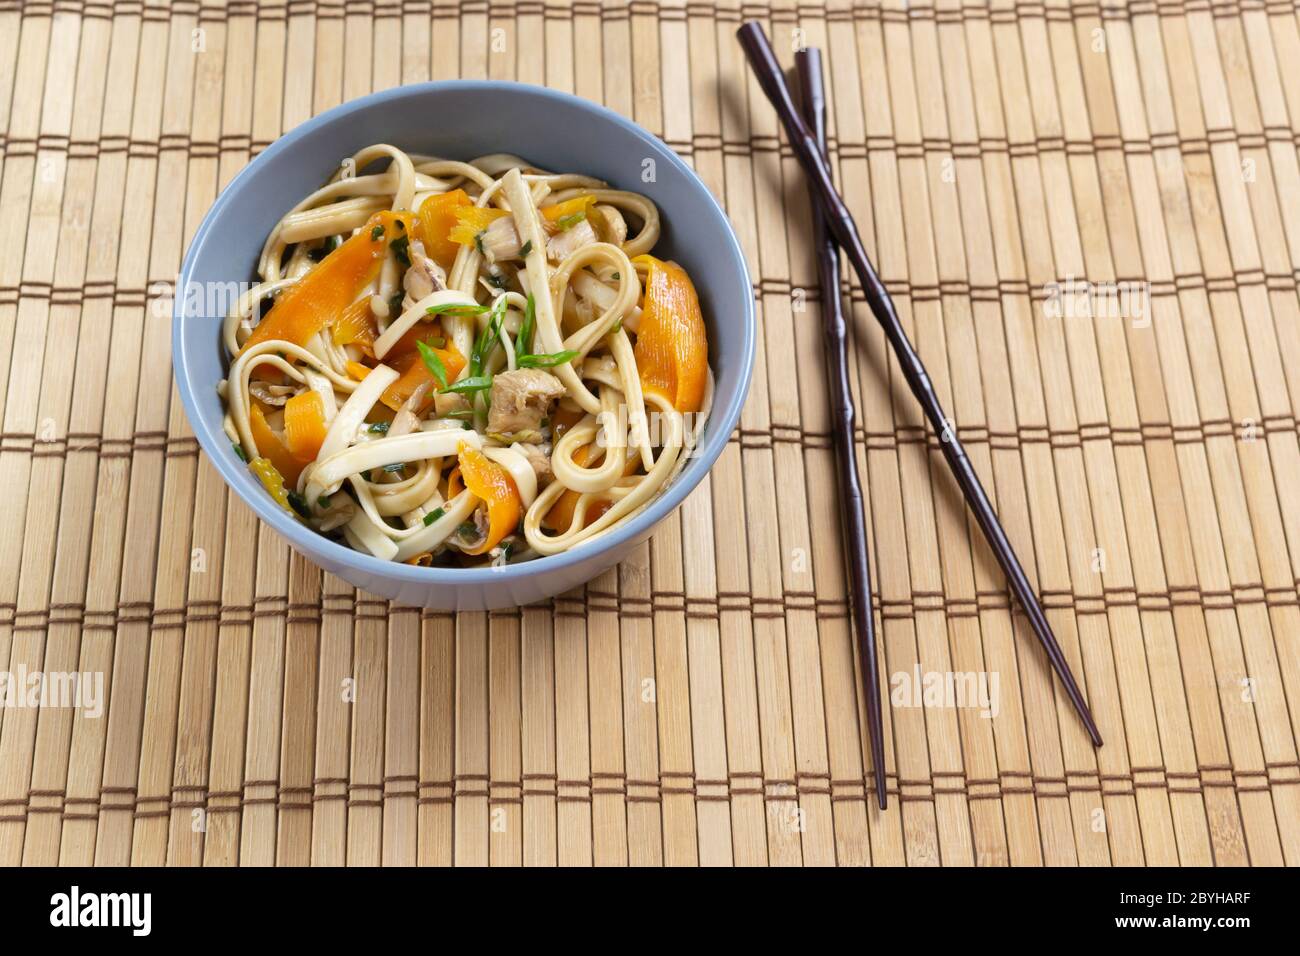 Udon noodles with chicken and carrots on a bamboo mat. Japanese kitchen. Copy space. Stock Photo